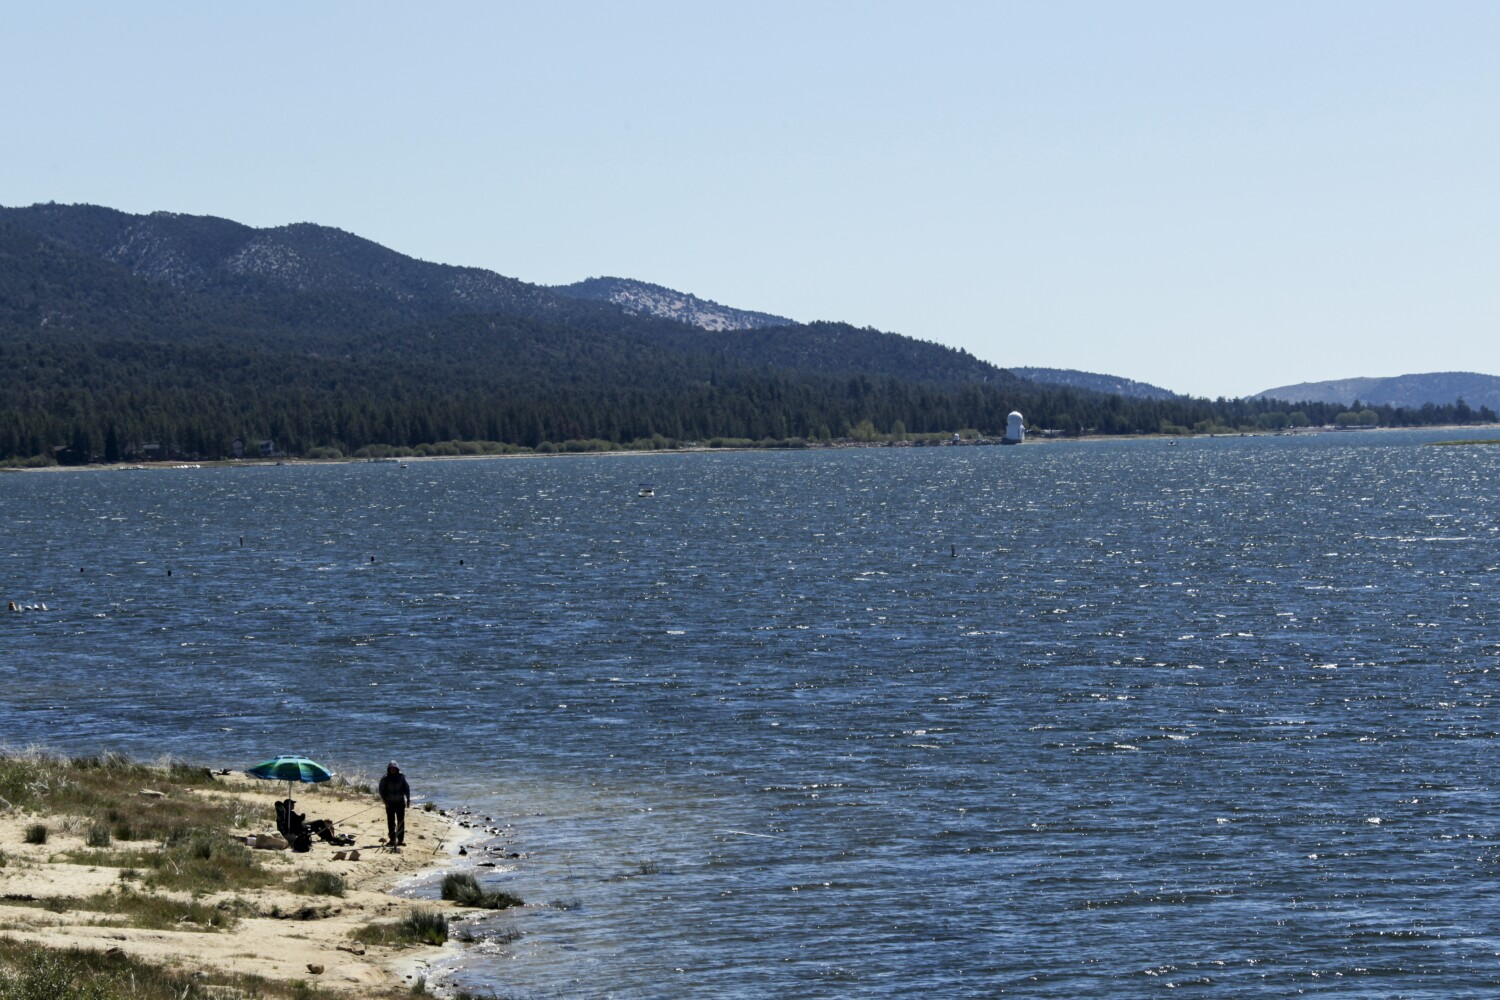 Stay out of the water: Officials warn about algae blooms in Lake Elsinore, Big Bear Lake